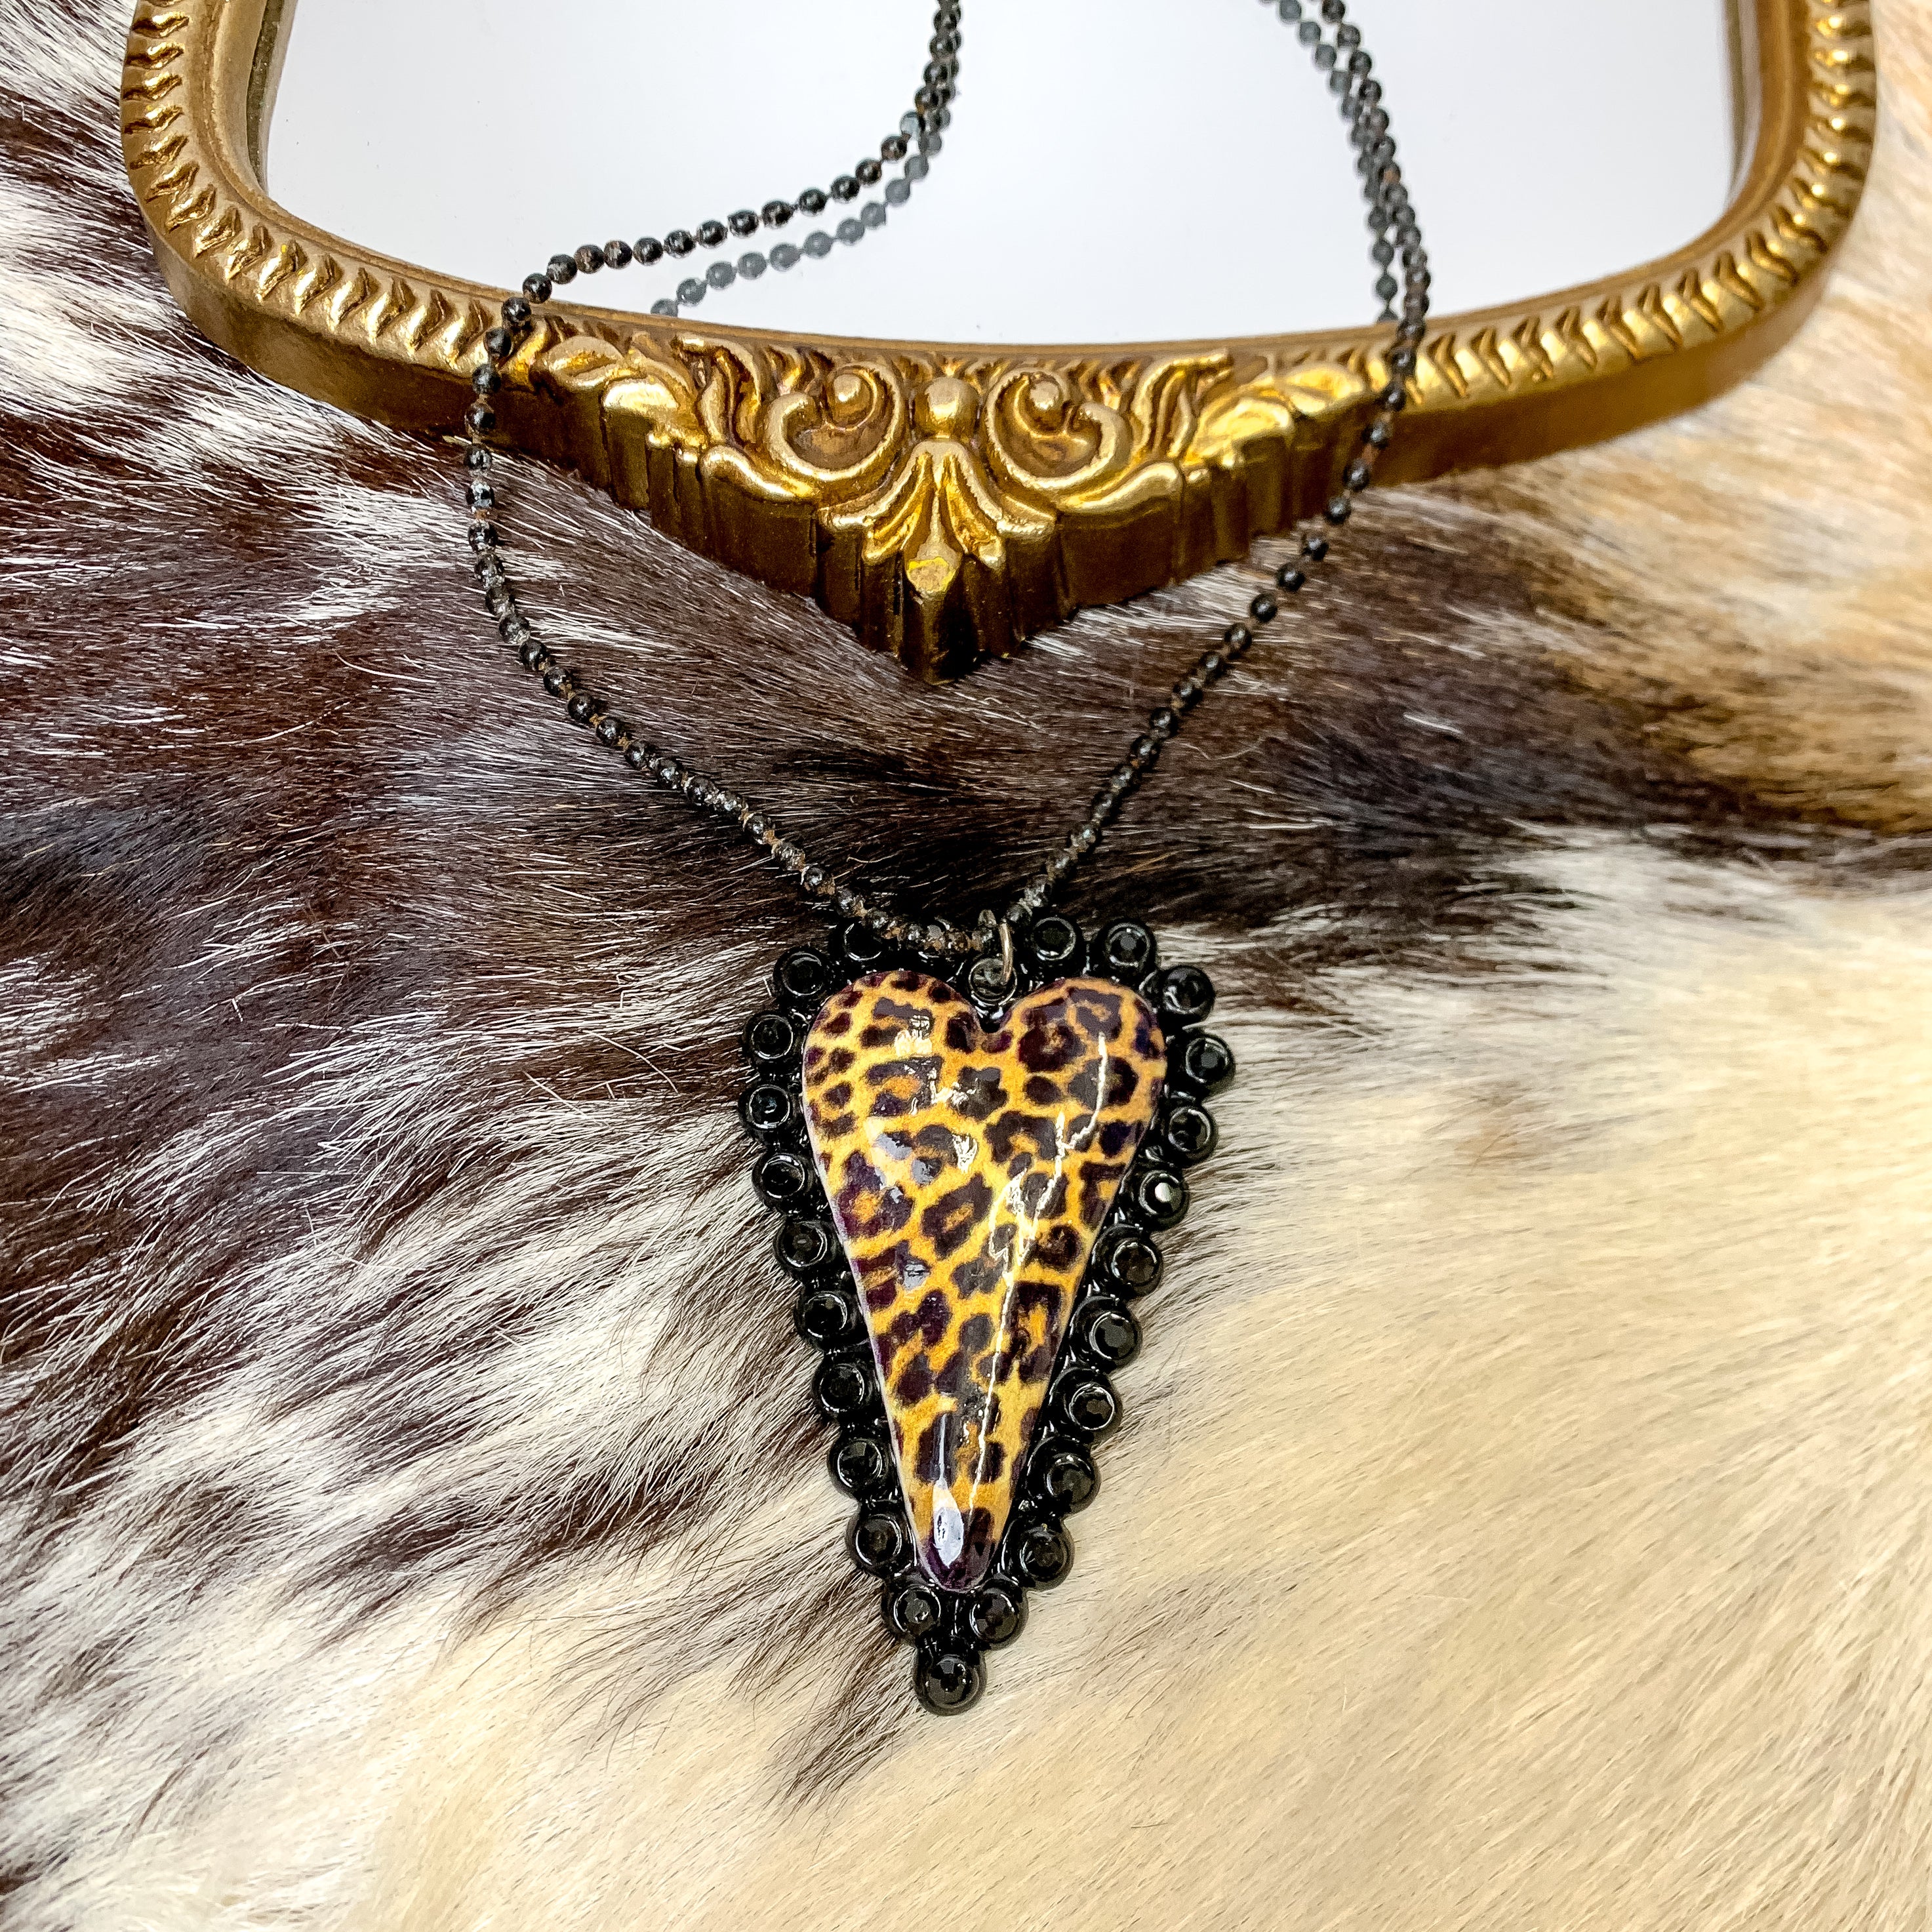 Black Beaded Necklace With Leopard Print Heart Pendant and Black Crystal Border Accents